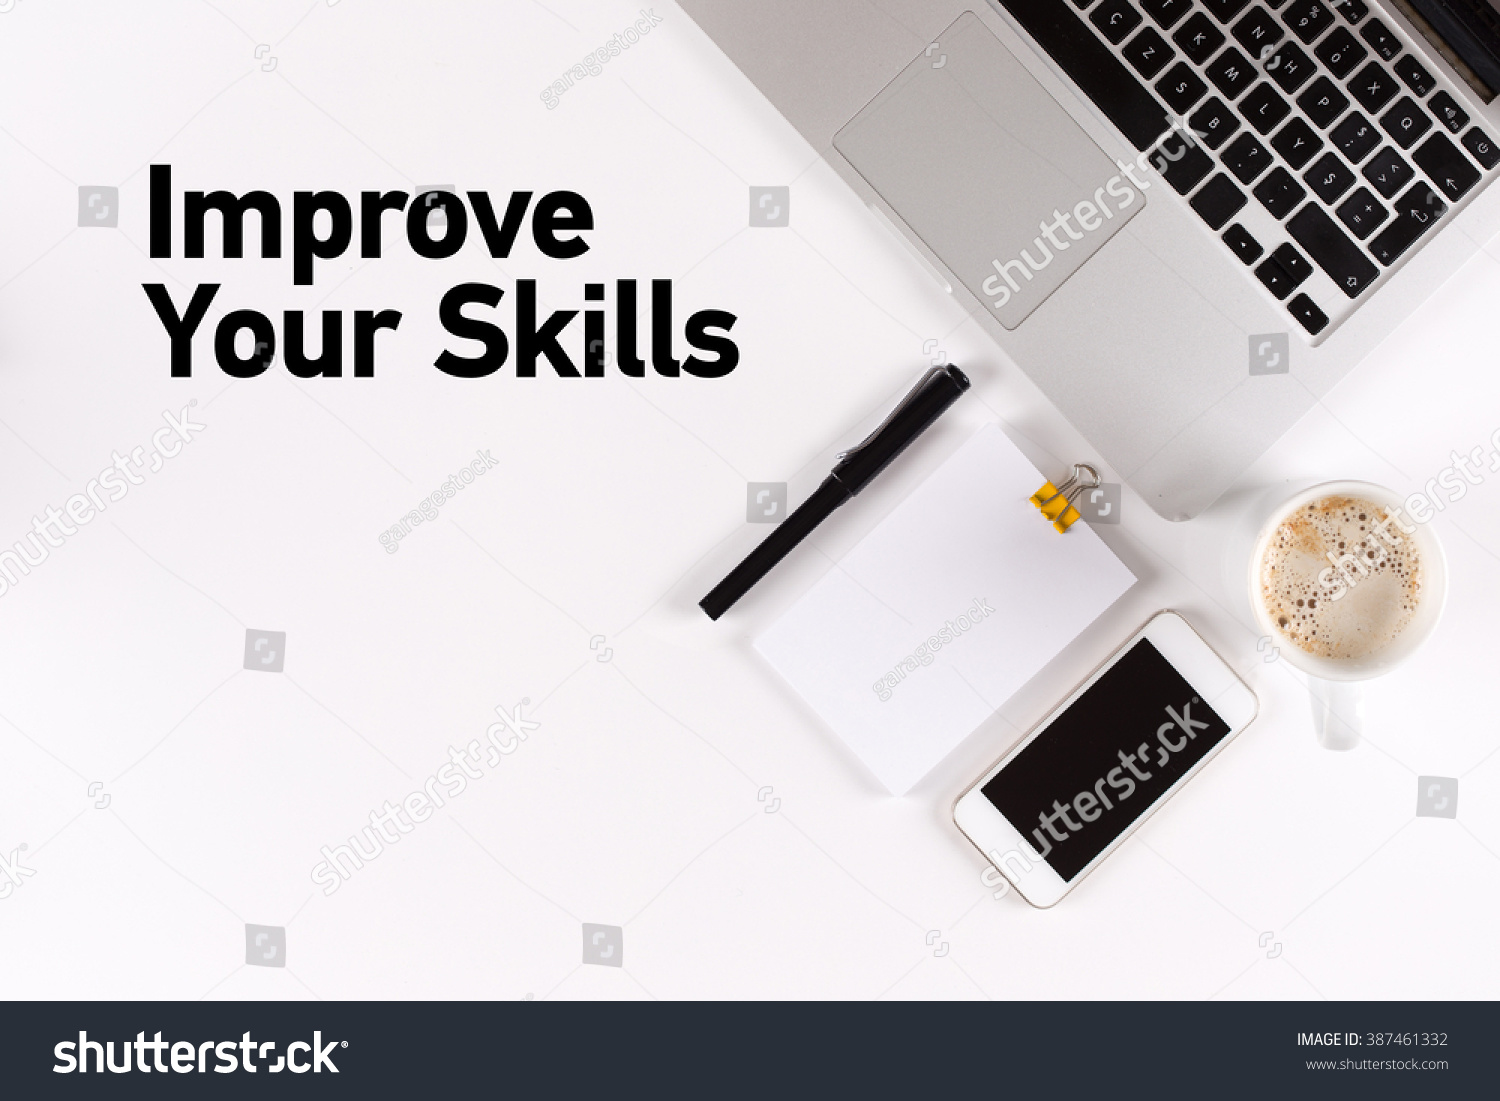 Improve Your Skills text on the desk with copy space #387461332